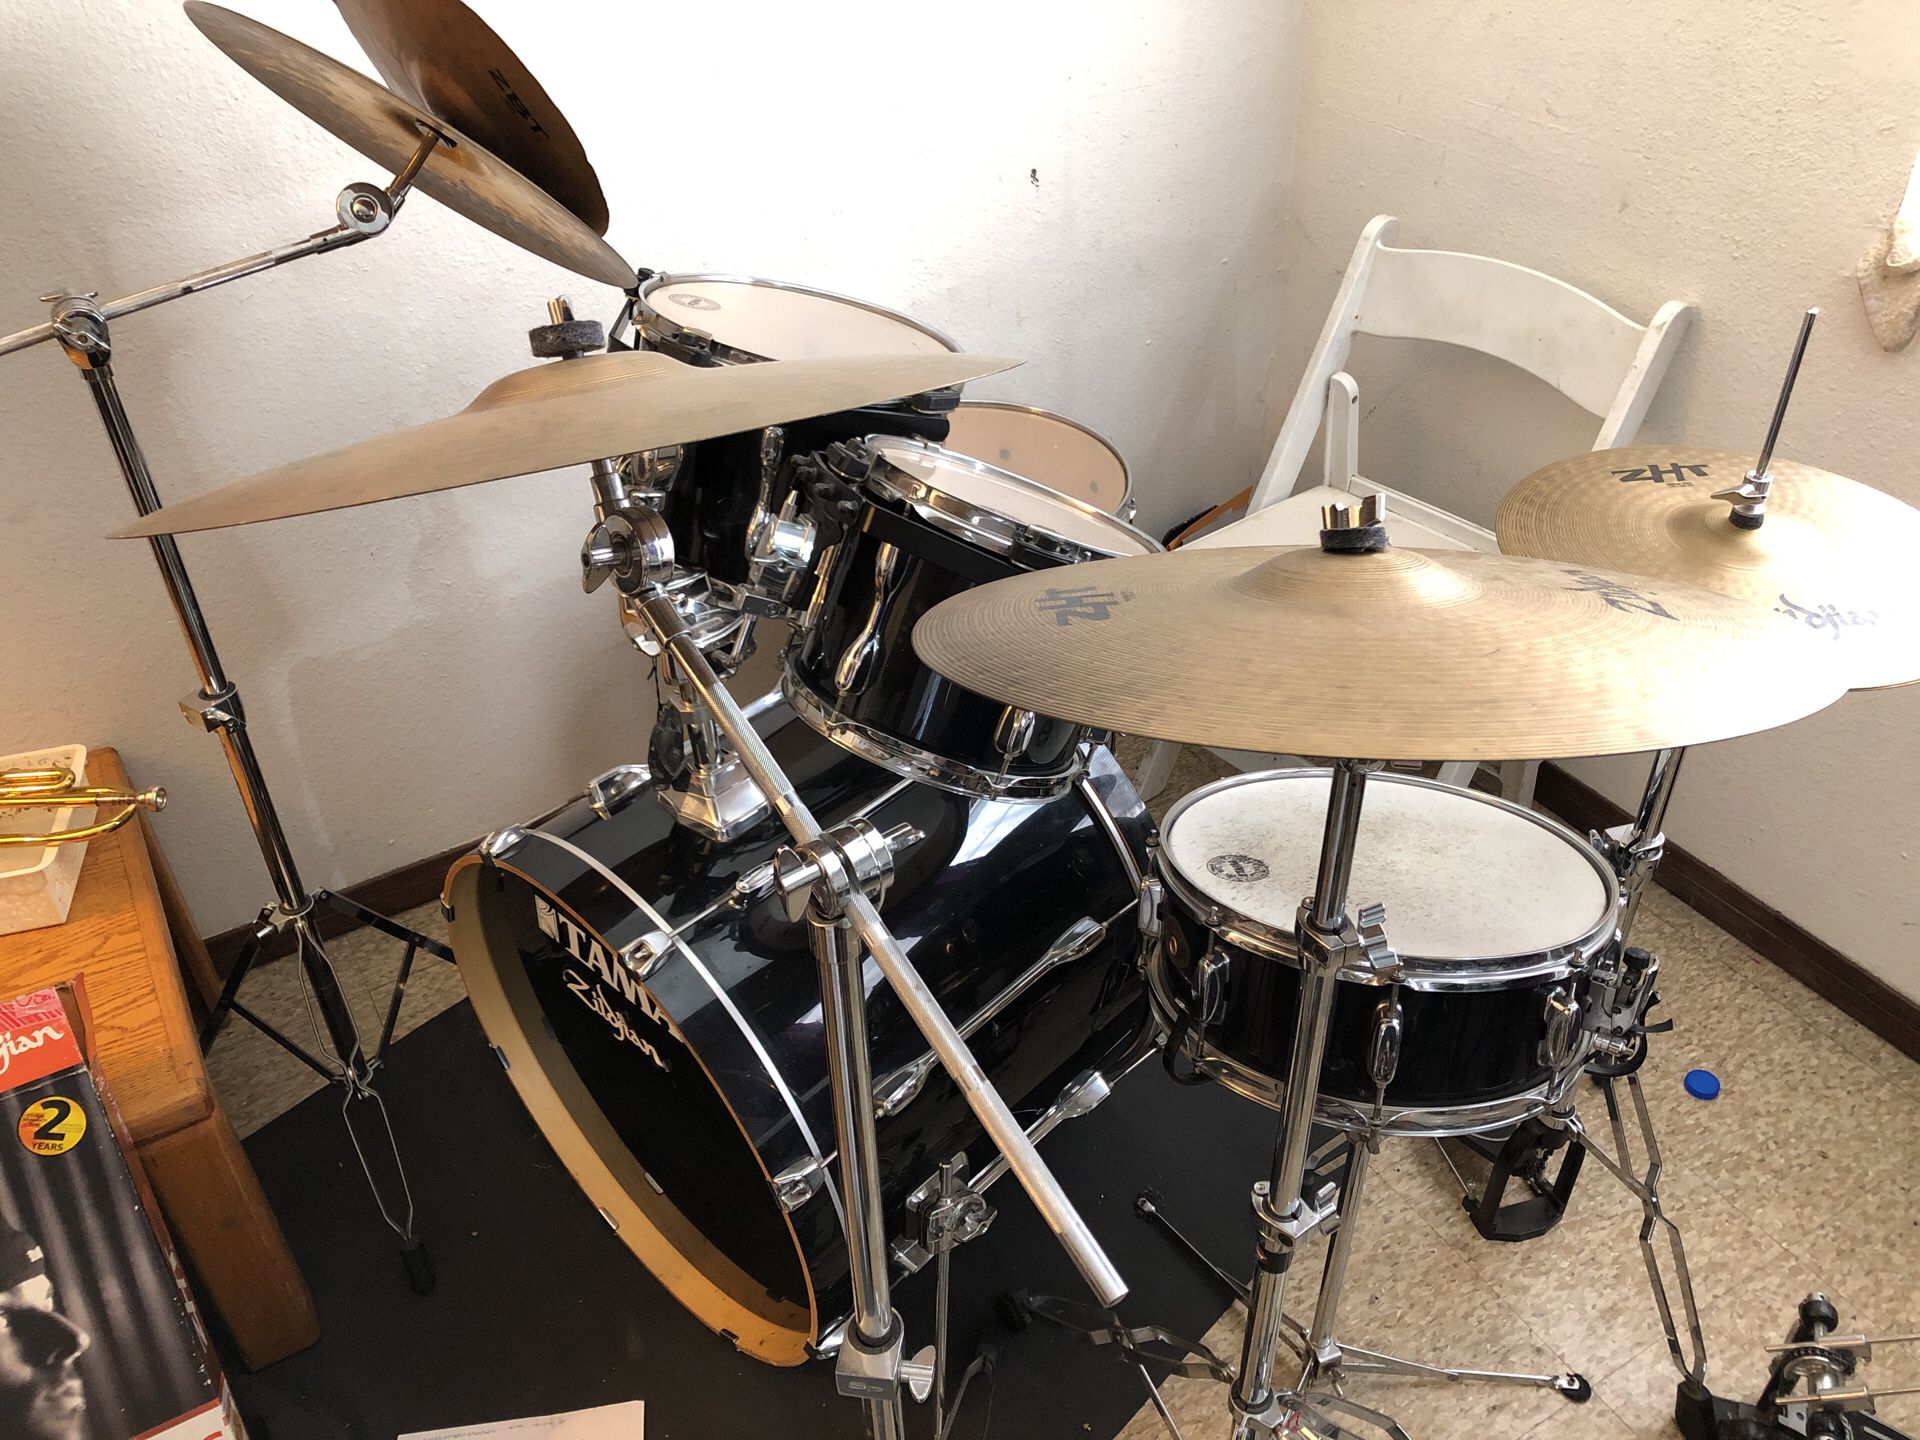 Tama complete drum set up with double bass pedal